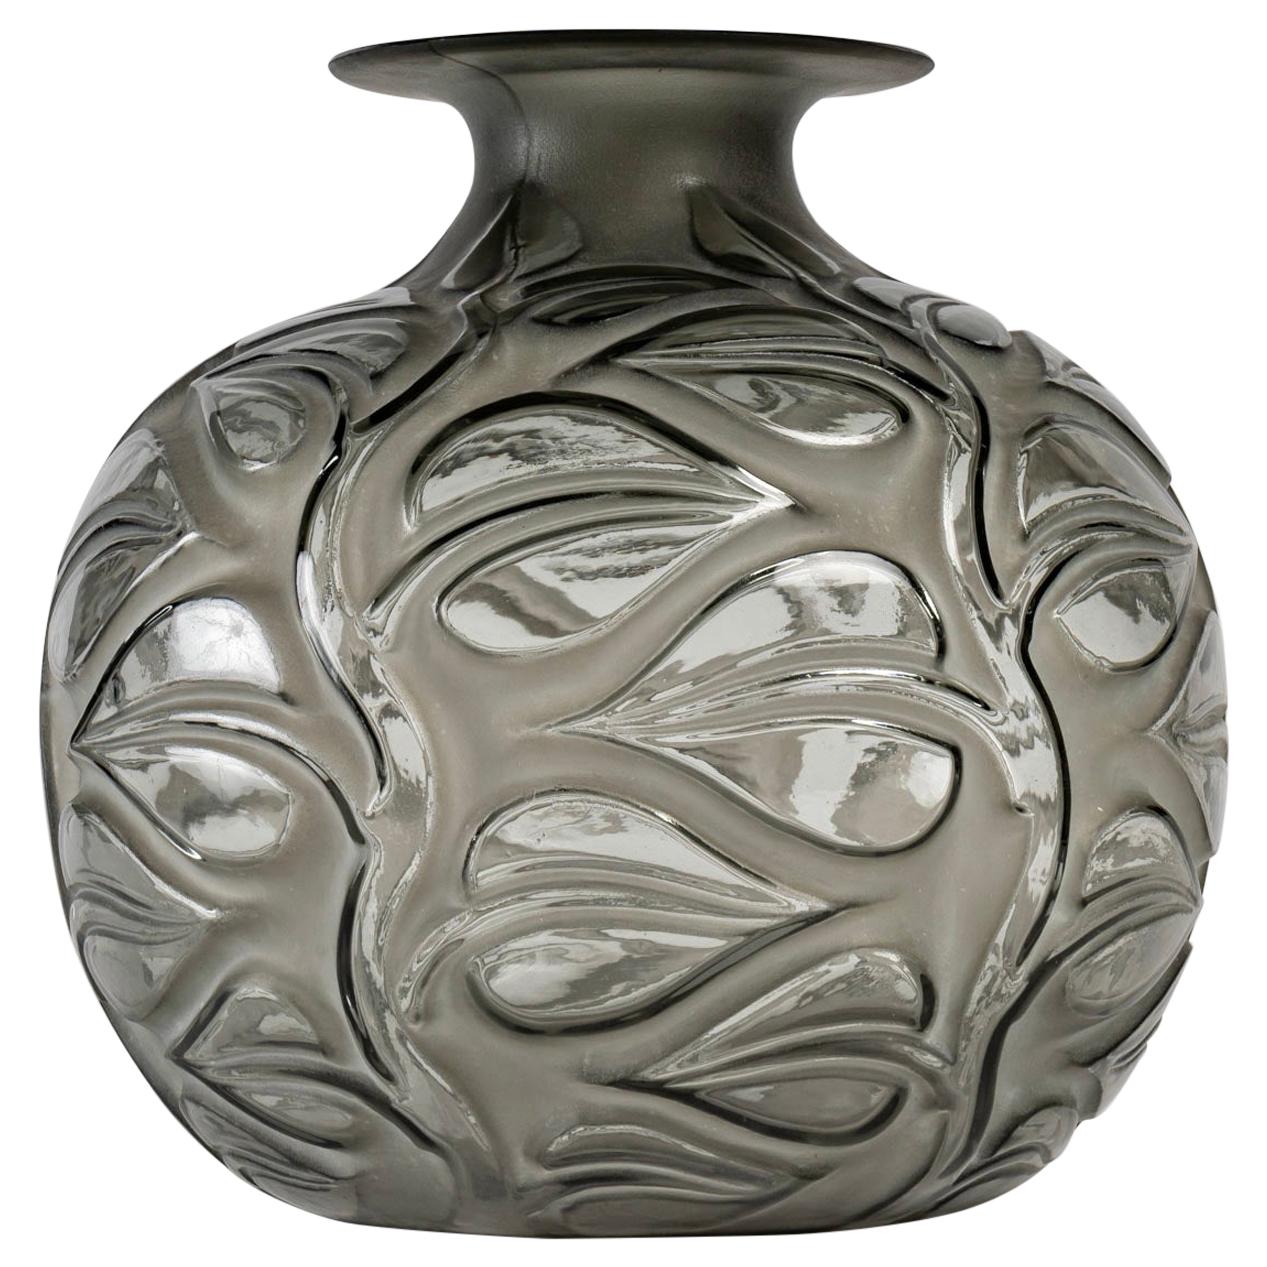 1926 René Lalique Sophora Vase in Grey Glass with Acid White Patina Leaves